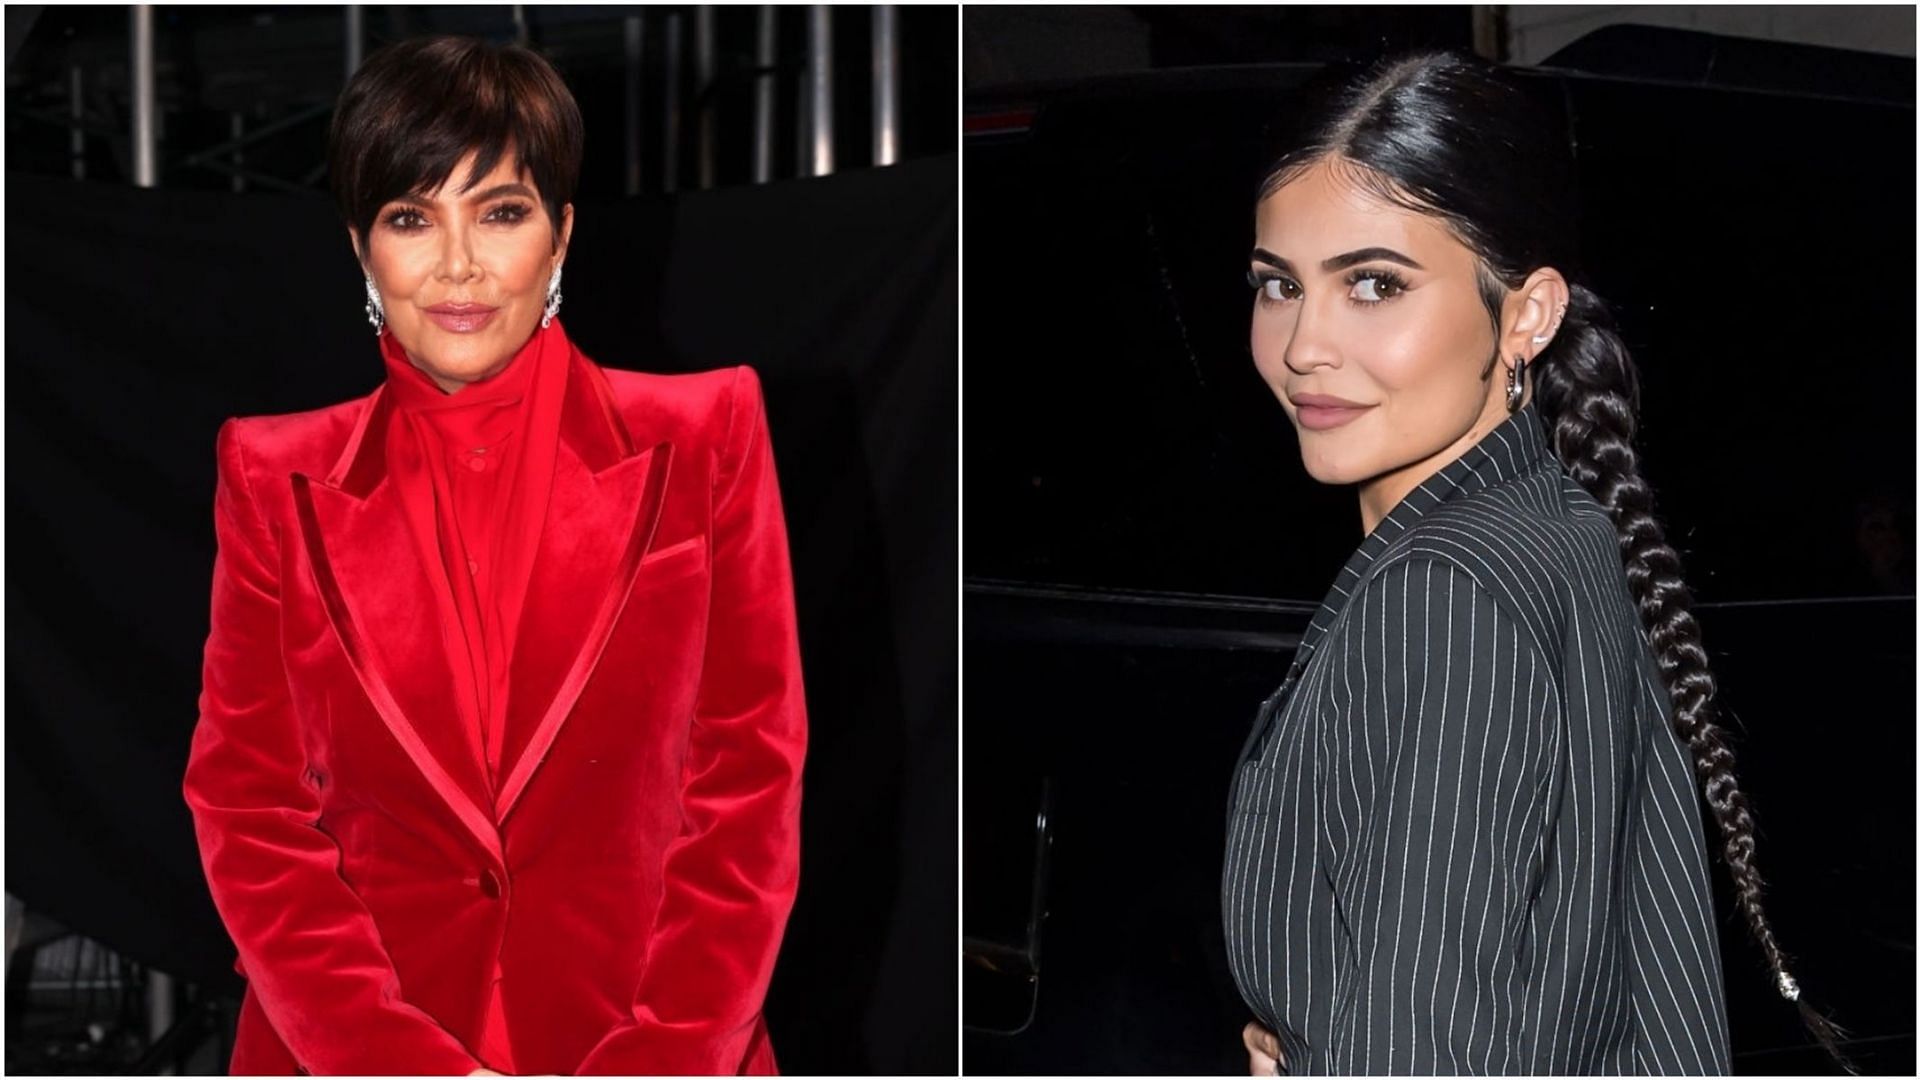 Kris Jenner congratulated her daughter Kylie Jenner on Instagram (Images via Christopher Polk and Gilbert Carrasquillo/Getty Images)